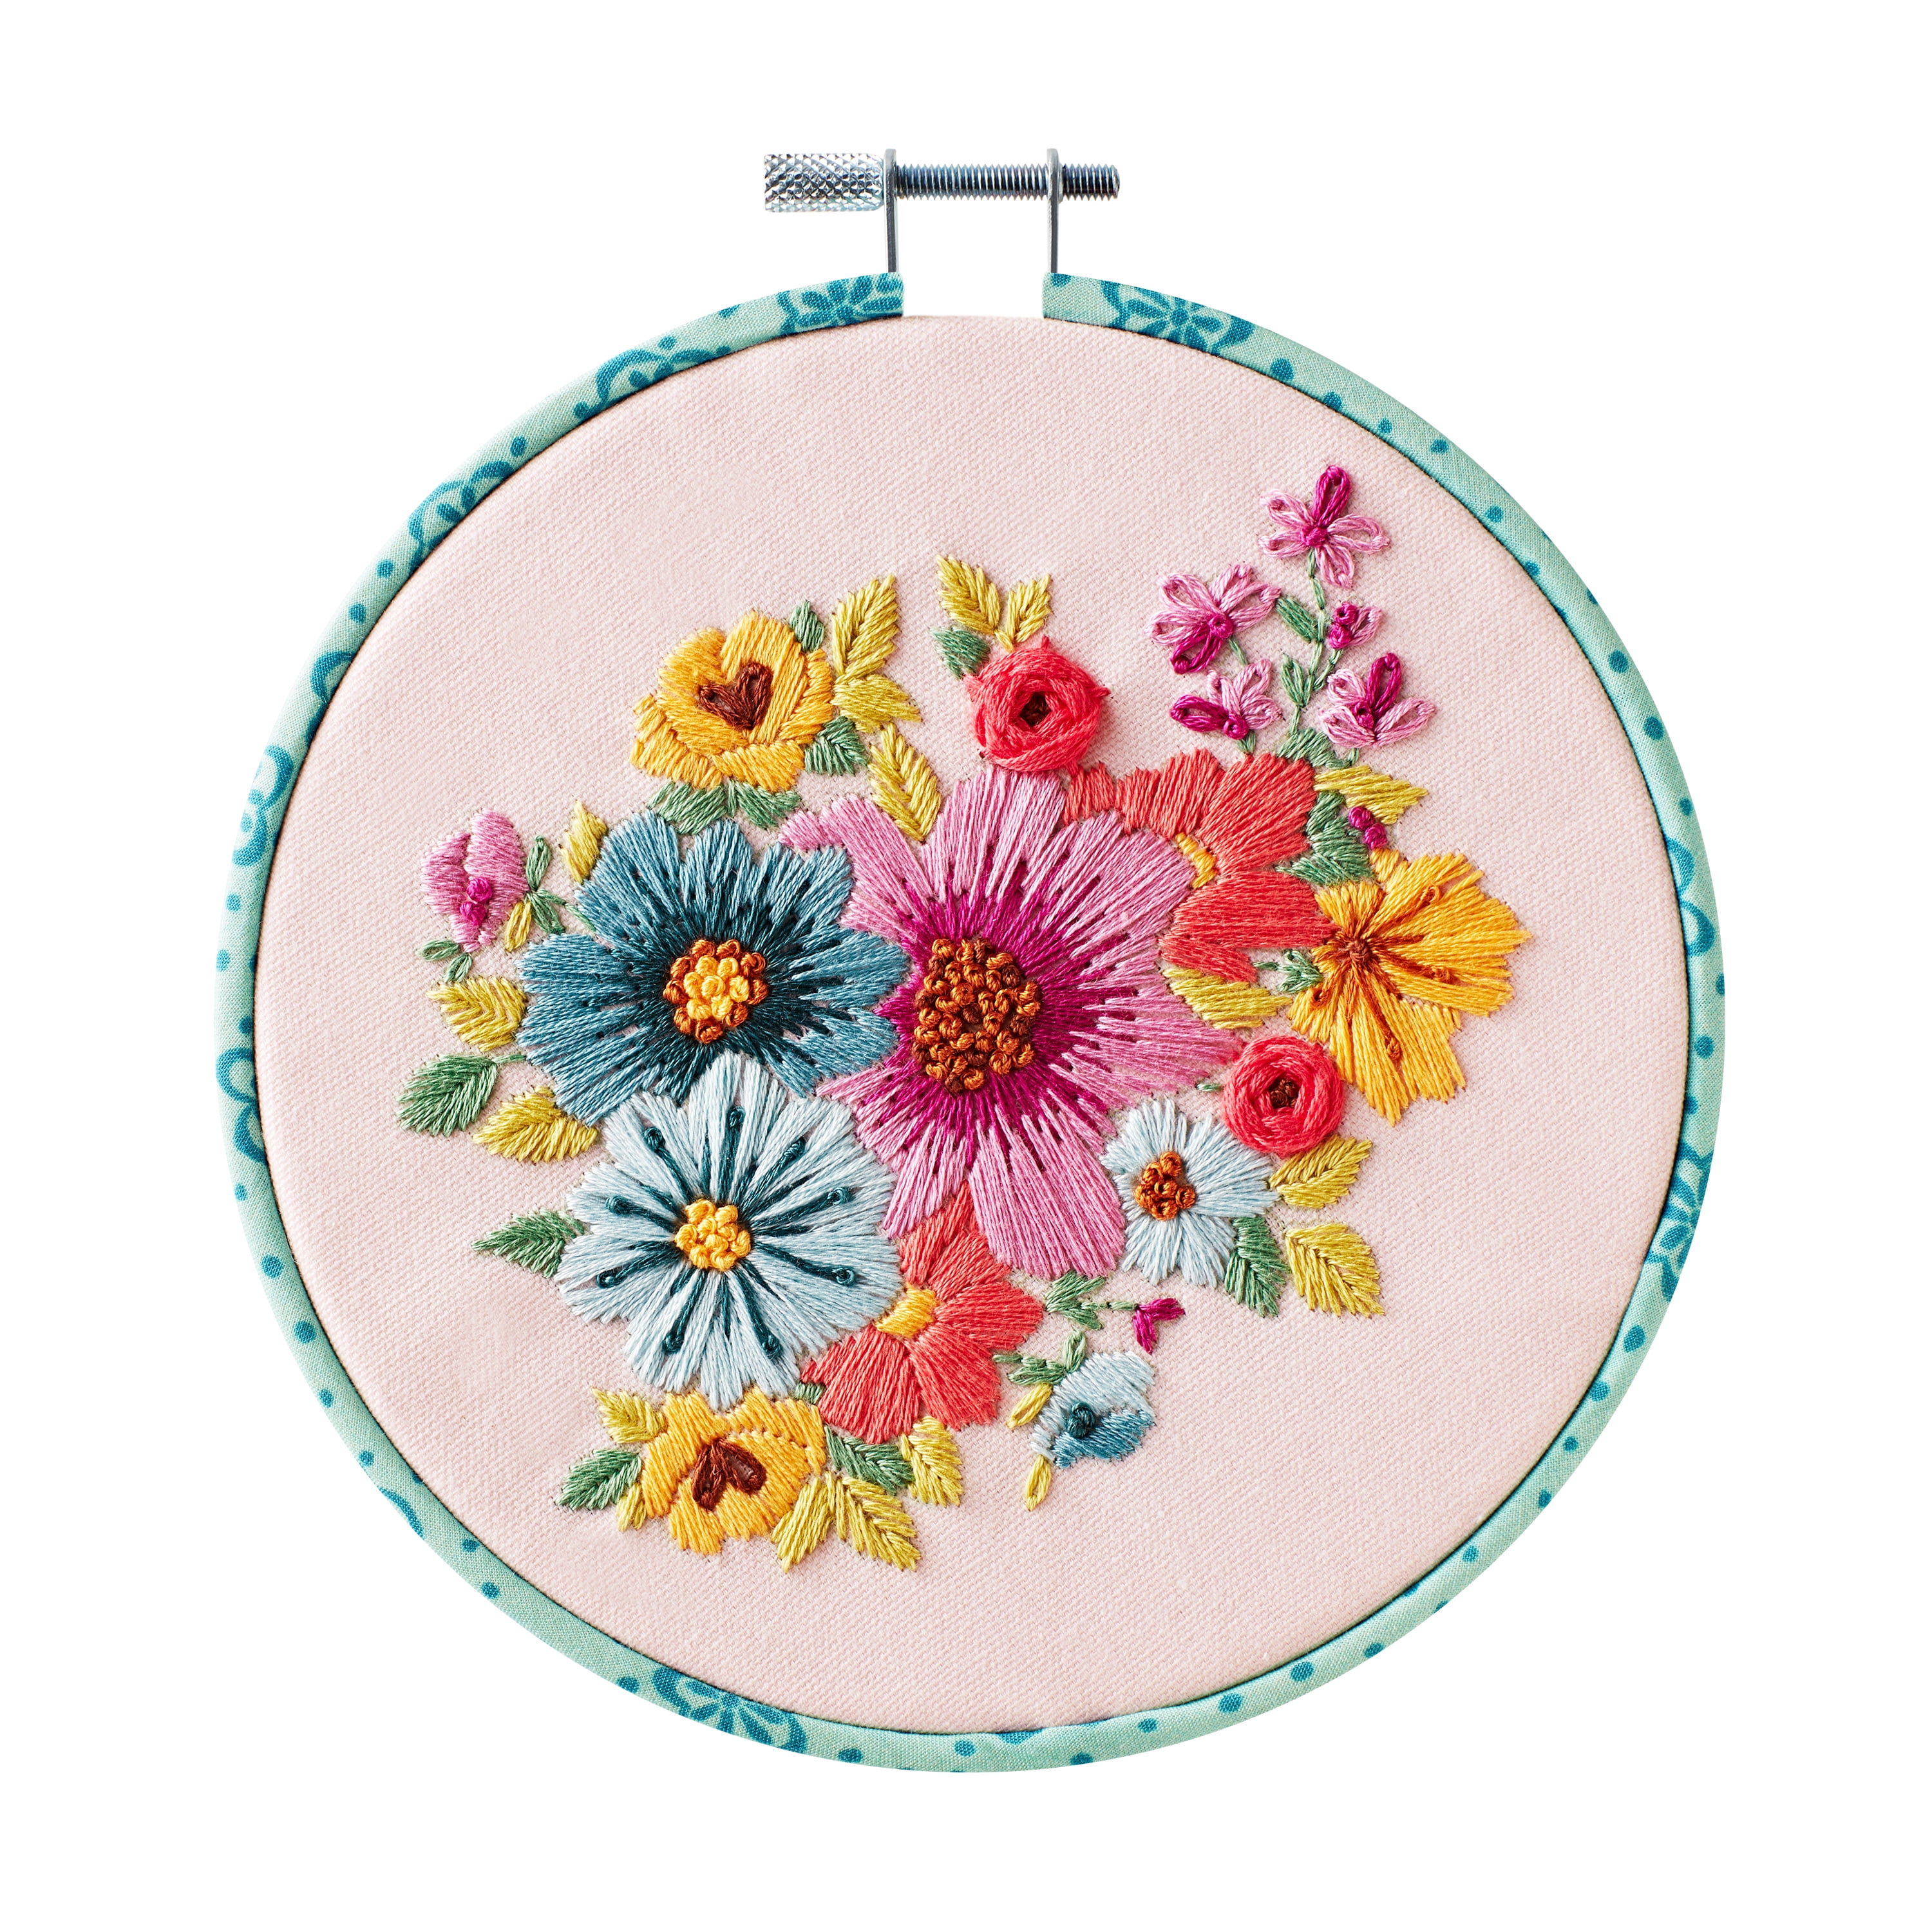 The Pioneer Woman Embroidery Kits - Where to Buy Ree Drummond's